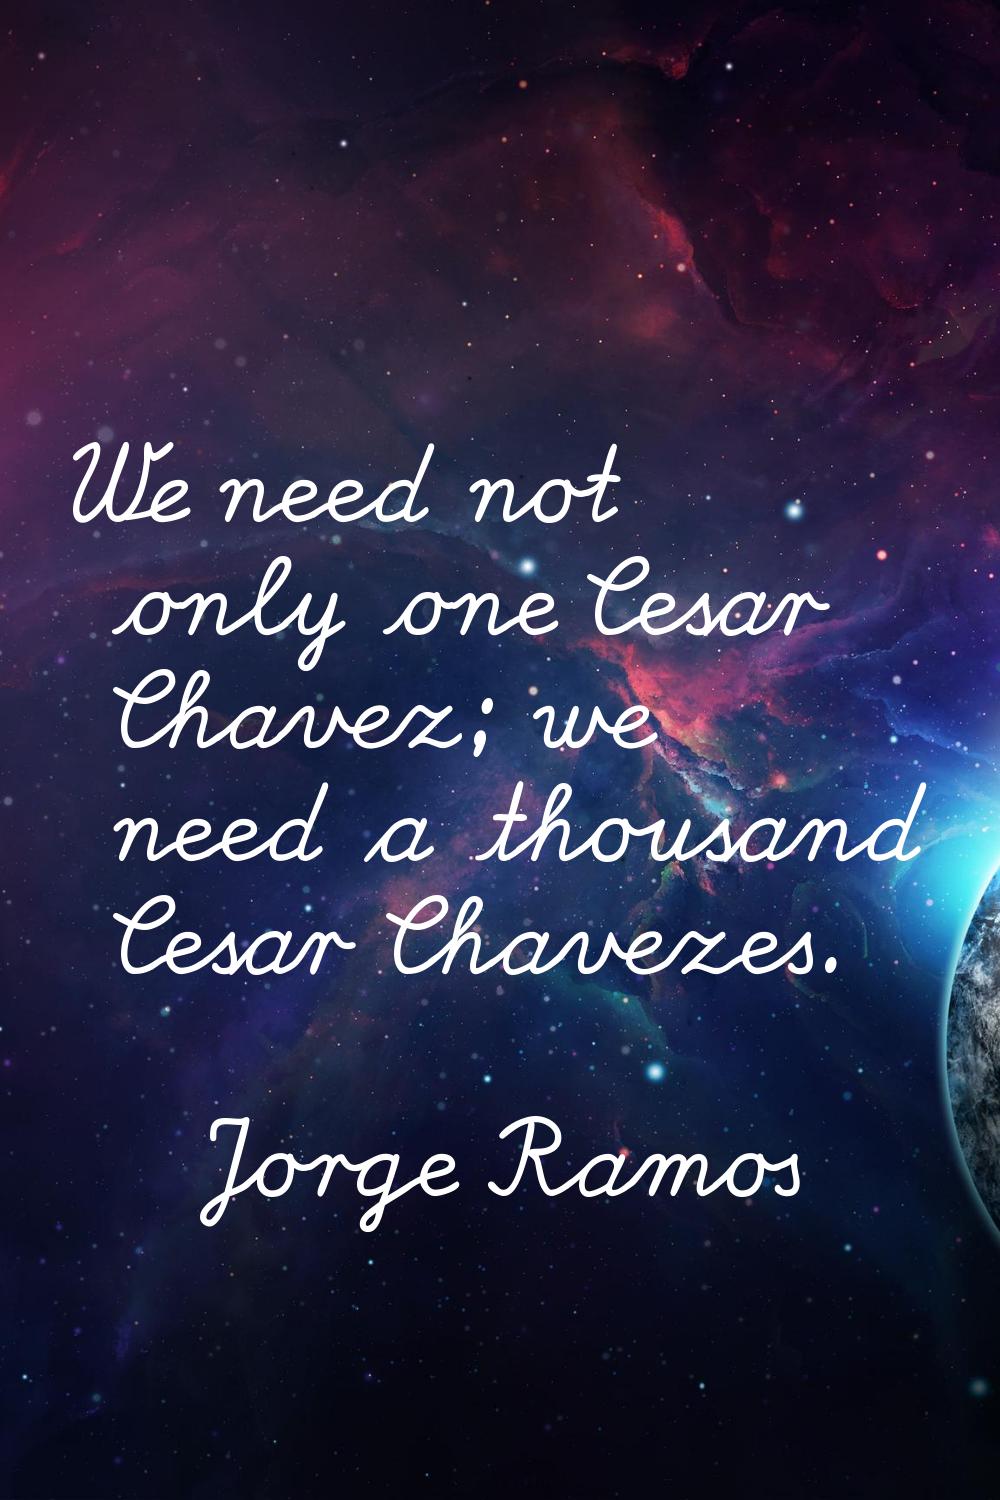 We need not only one Cesar Chavez; we need a thousand Cesar Chavezes.